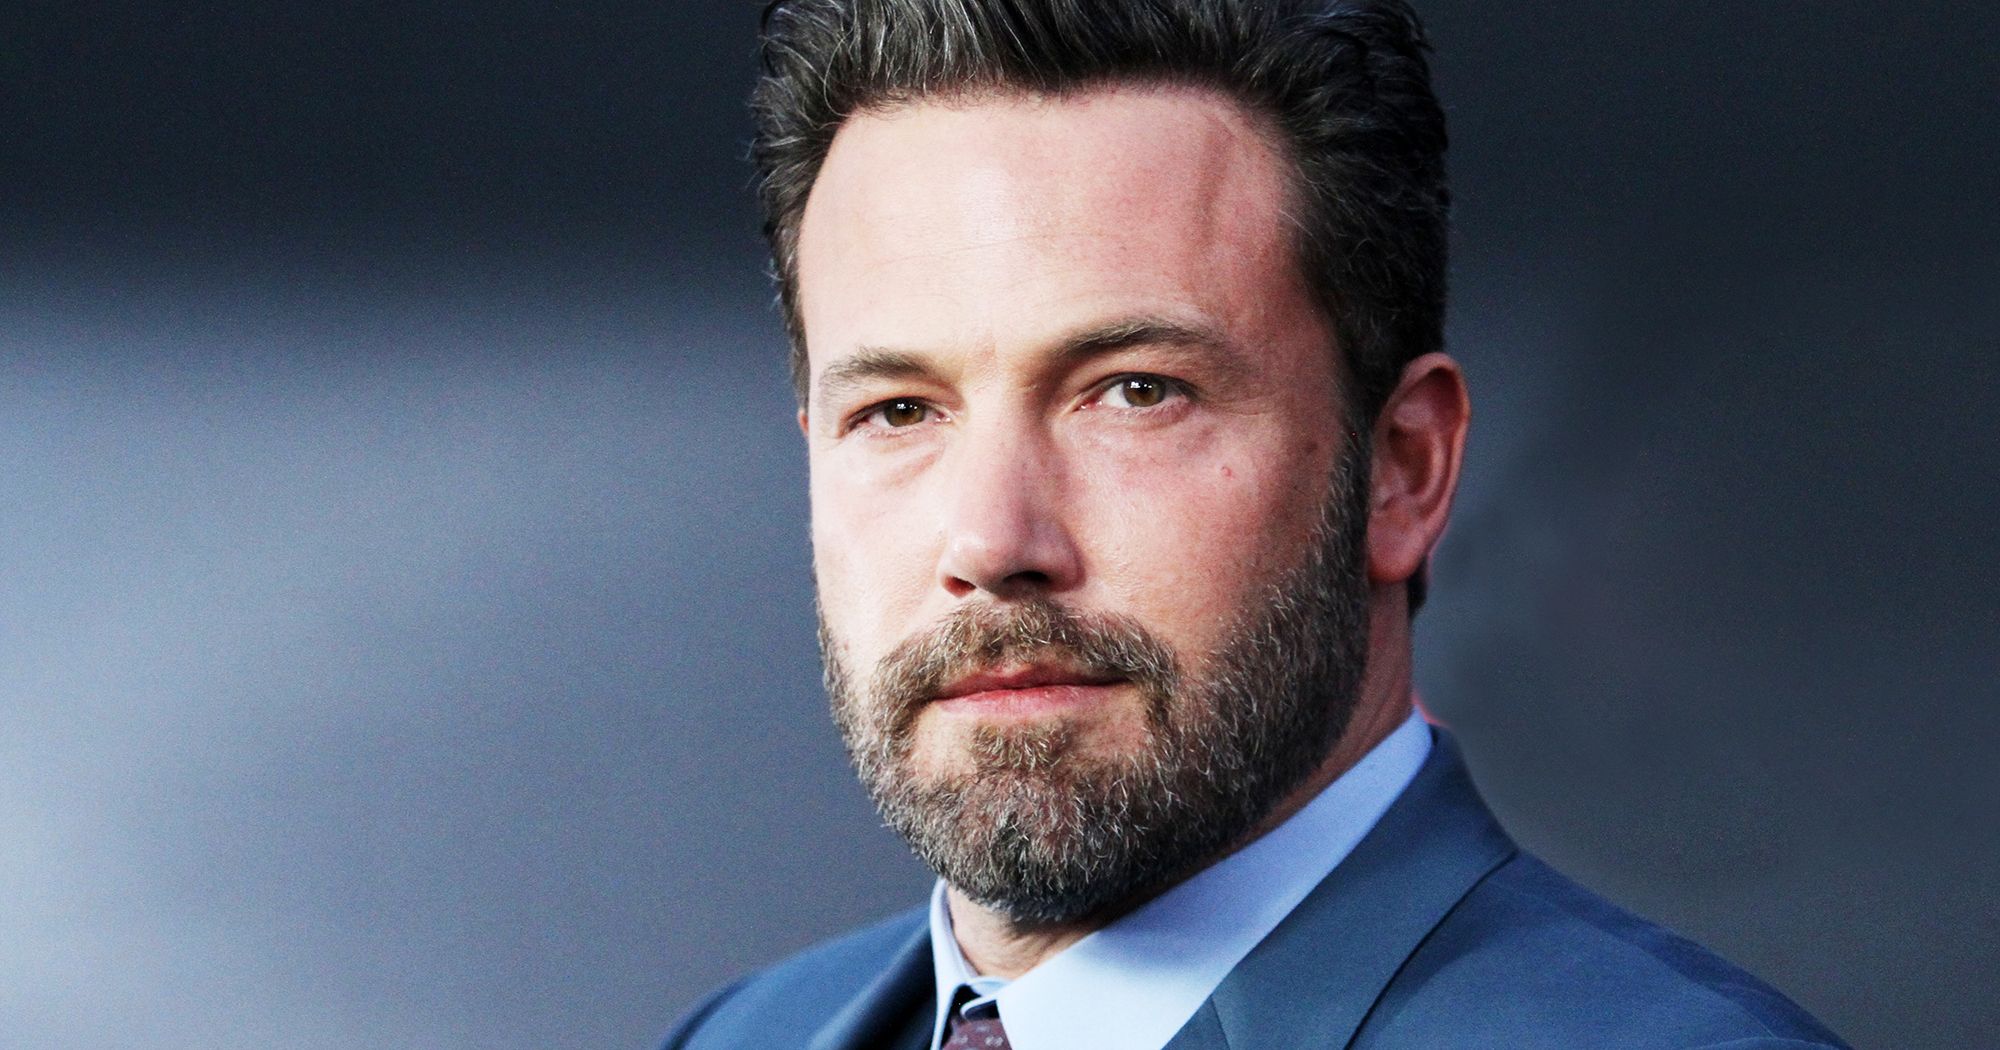 The Journalist In That Viral Clip Of Ben Affleck Says It Wasn’t Sexual Harassment